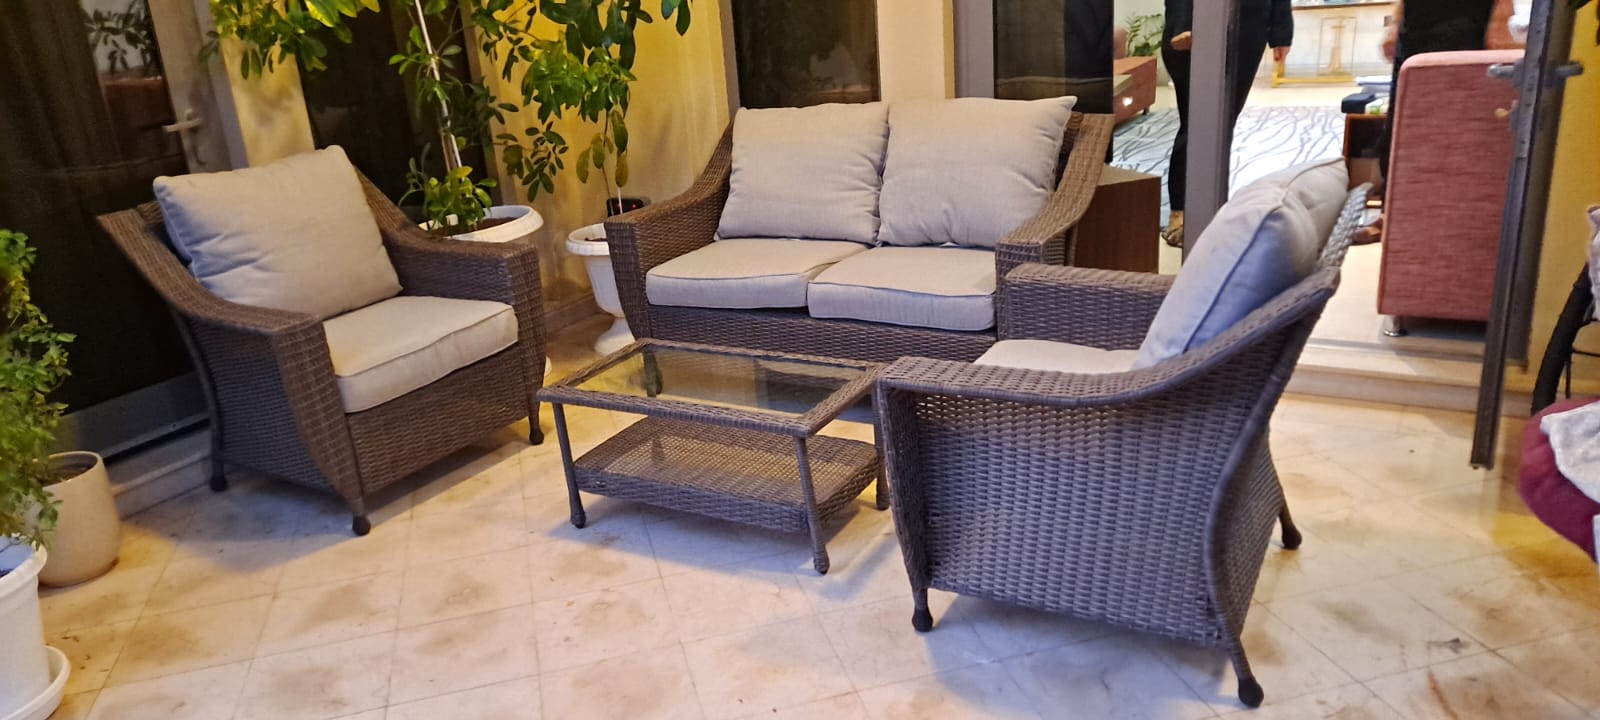 Swin Rattan Outdoor Fabric Sofa with Table Brown photo review